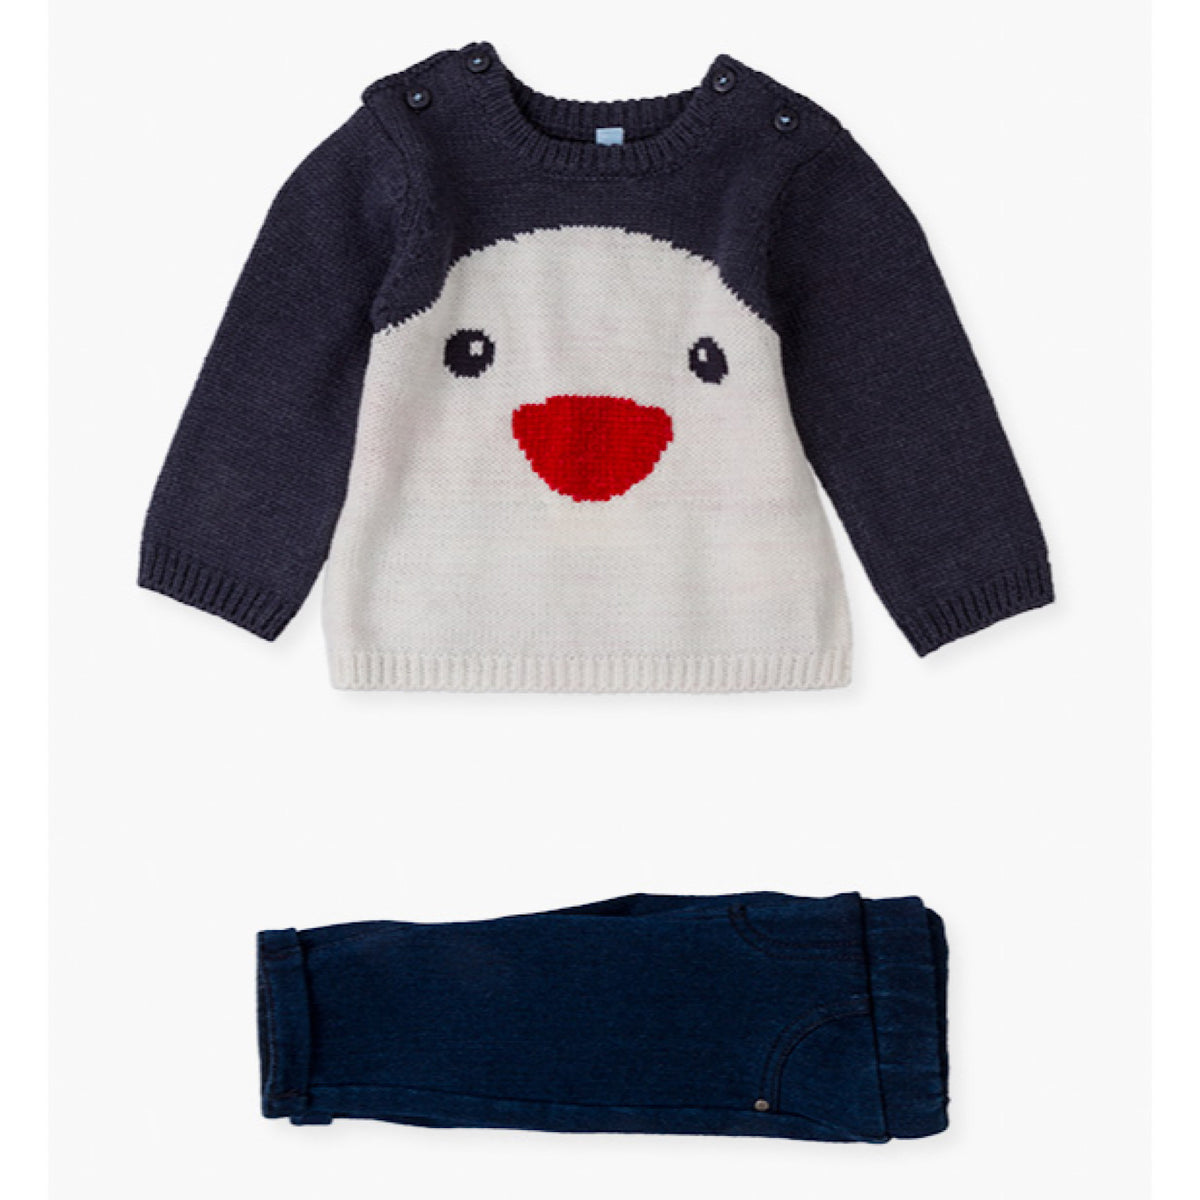 Knit Penguin Sweater and Denim Trousers Set